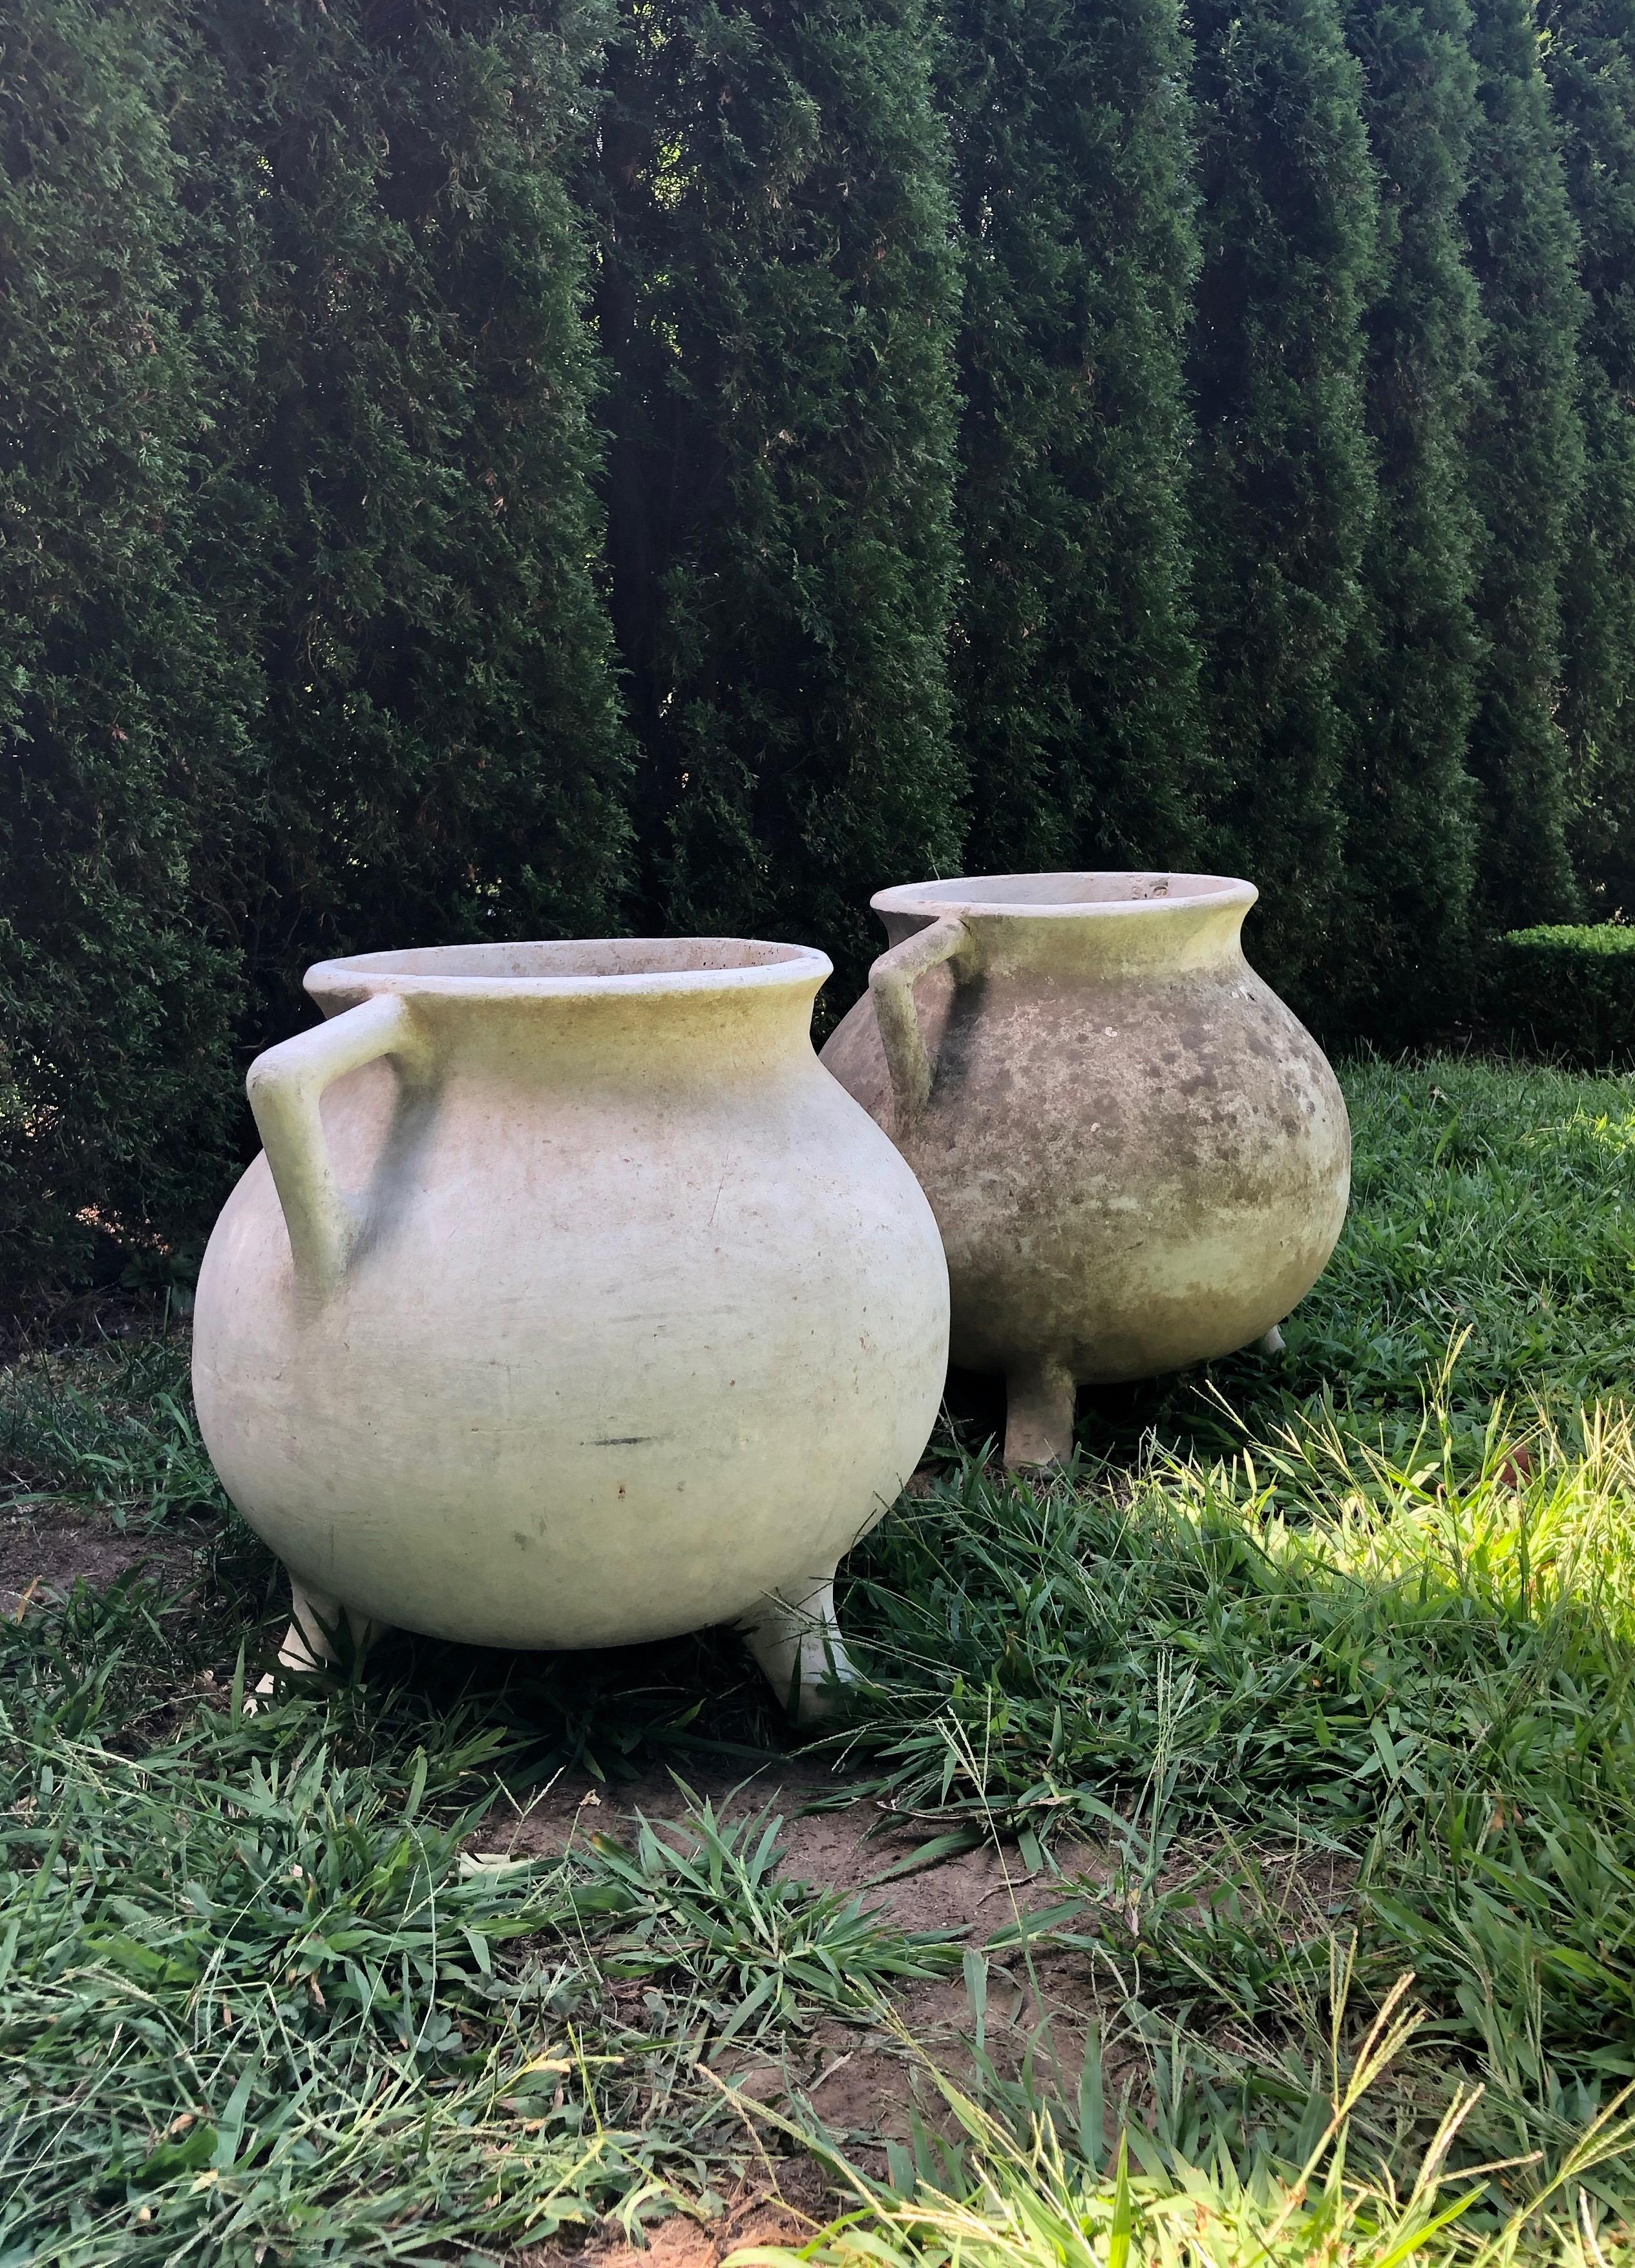 We are huge fans of Willy Guhl garden pieces and these are a pair of “Marmite” planters with different patinas. One has a well-weathered surface, while the other has been painted white in the not-too-distant past. Nonetheless, they would look